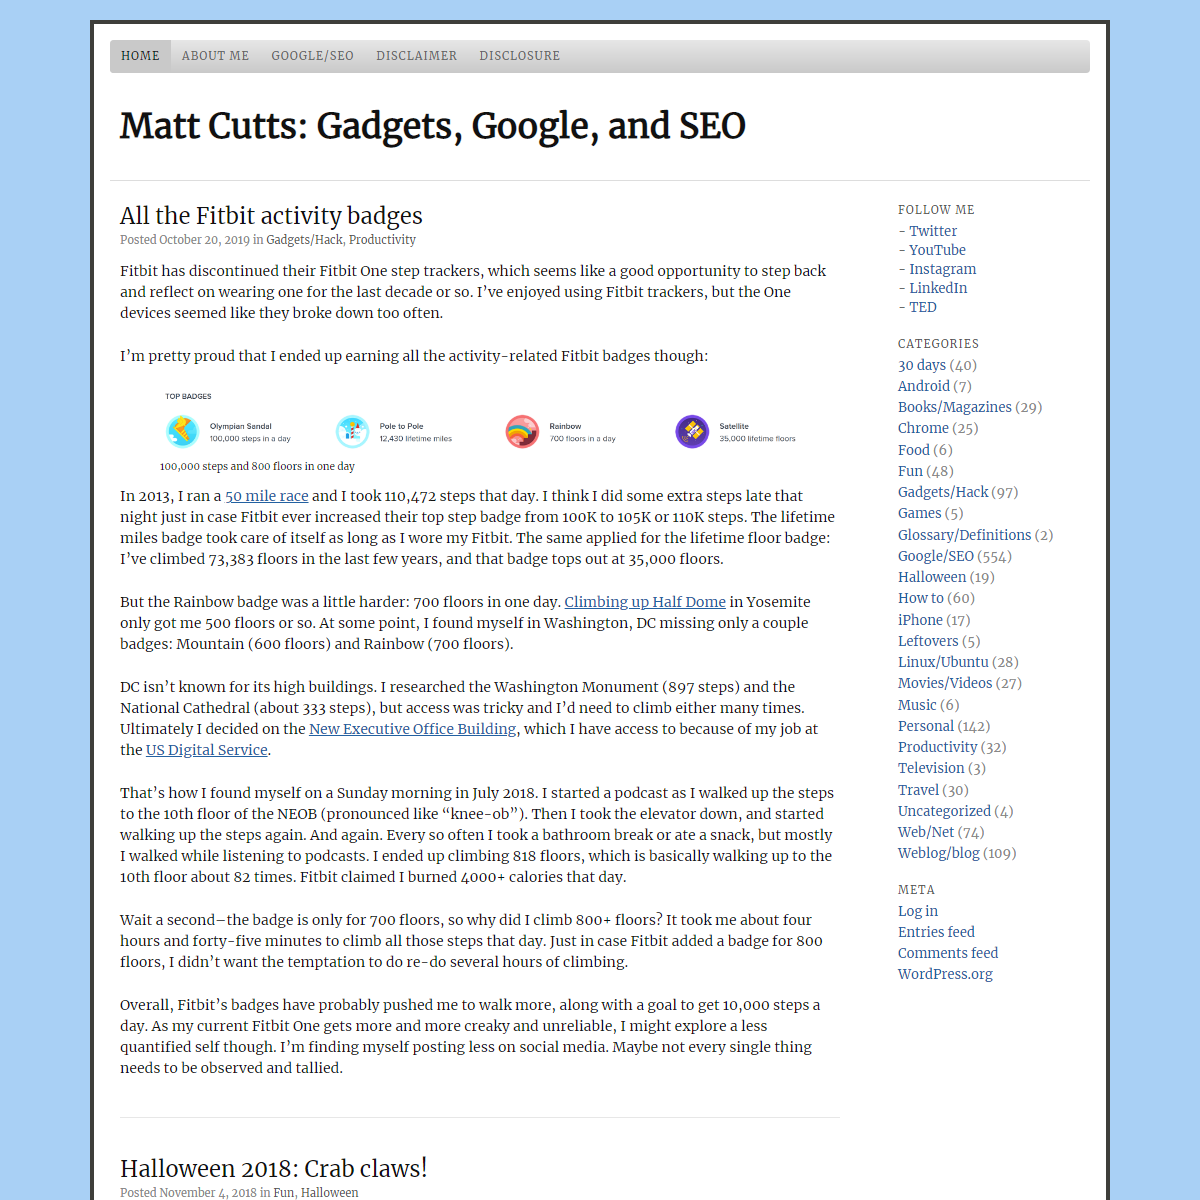 A complete backup of https://www.mattcutts.com/blog/